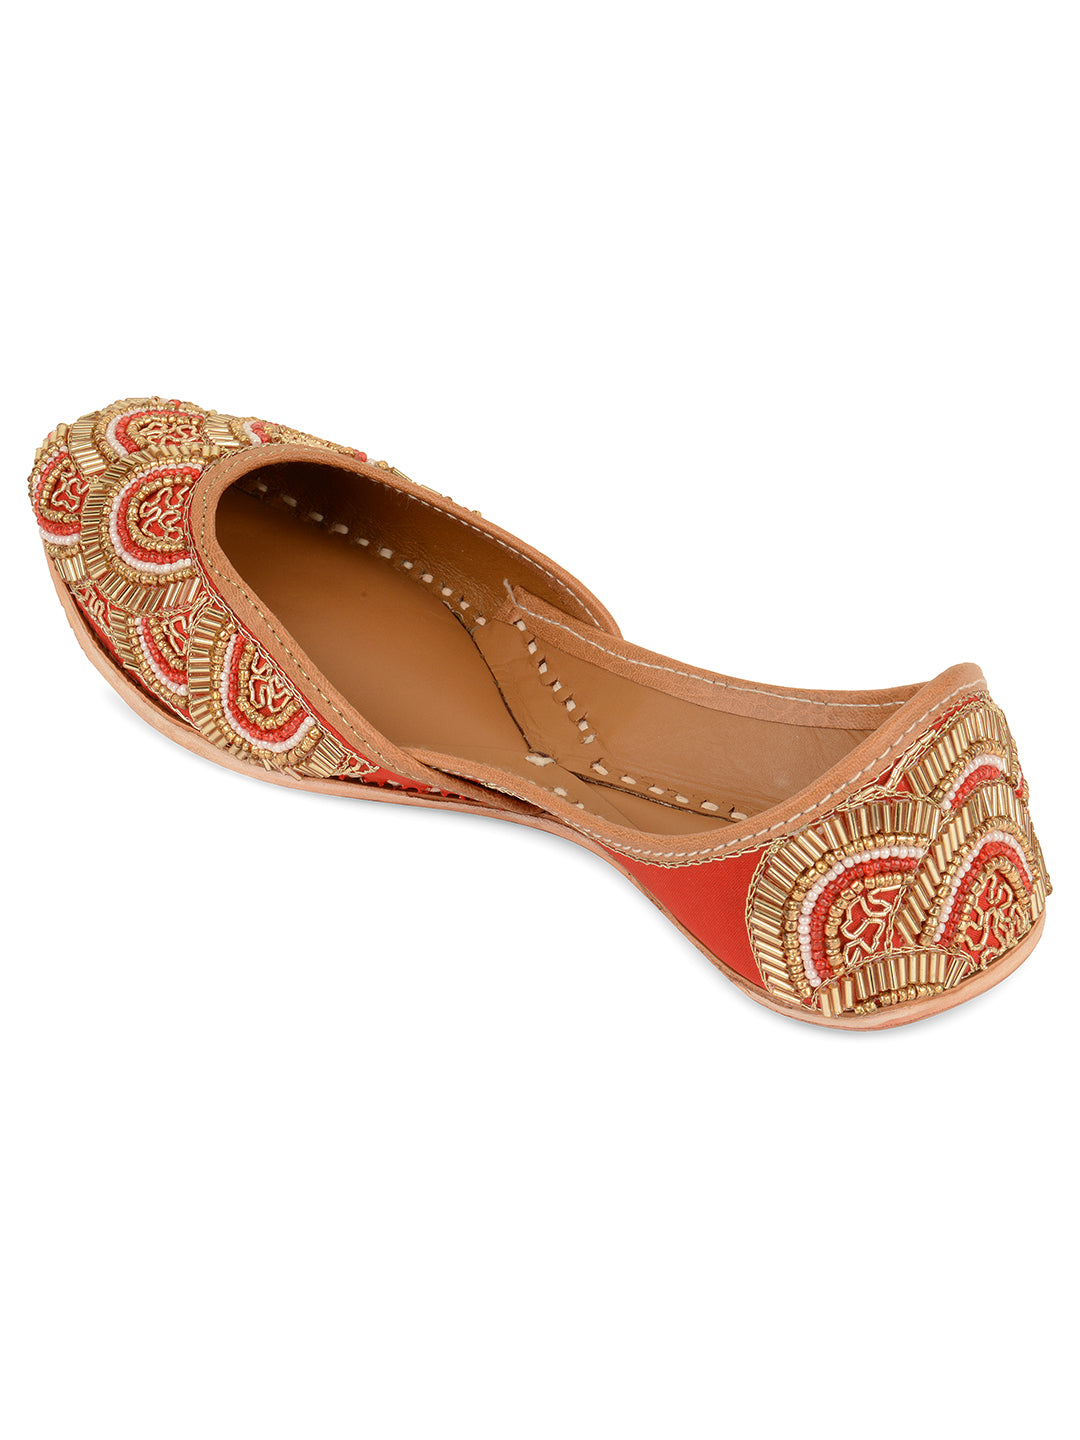 DESI COLOUR Women Red Embellished Leather Ethnic Flats